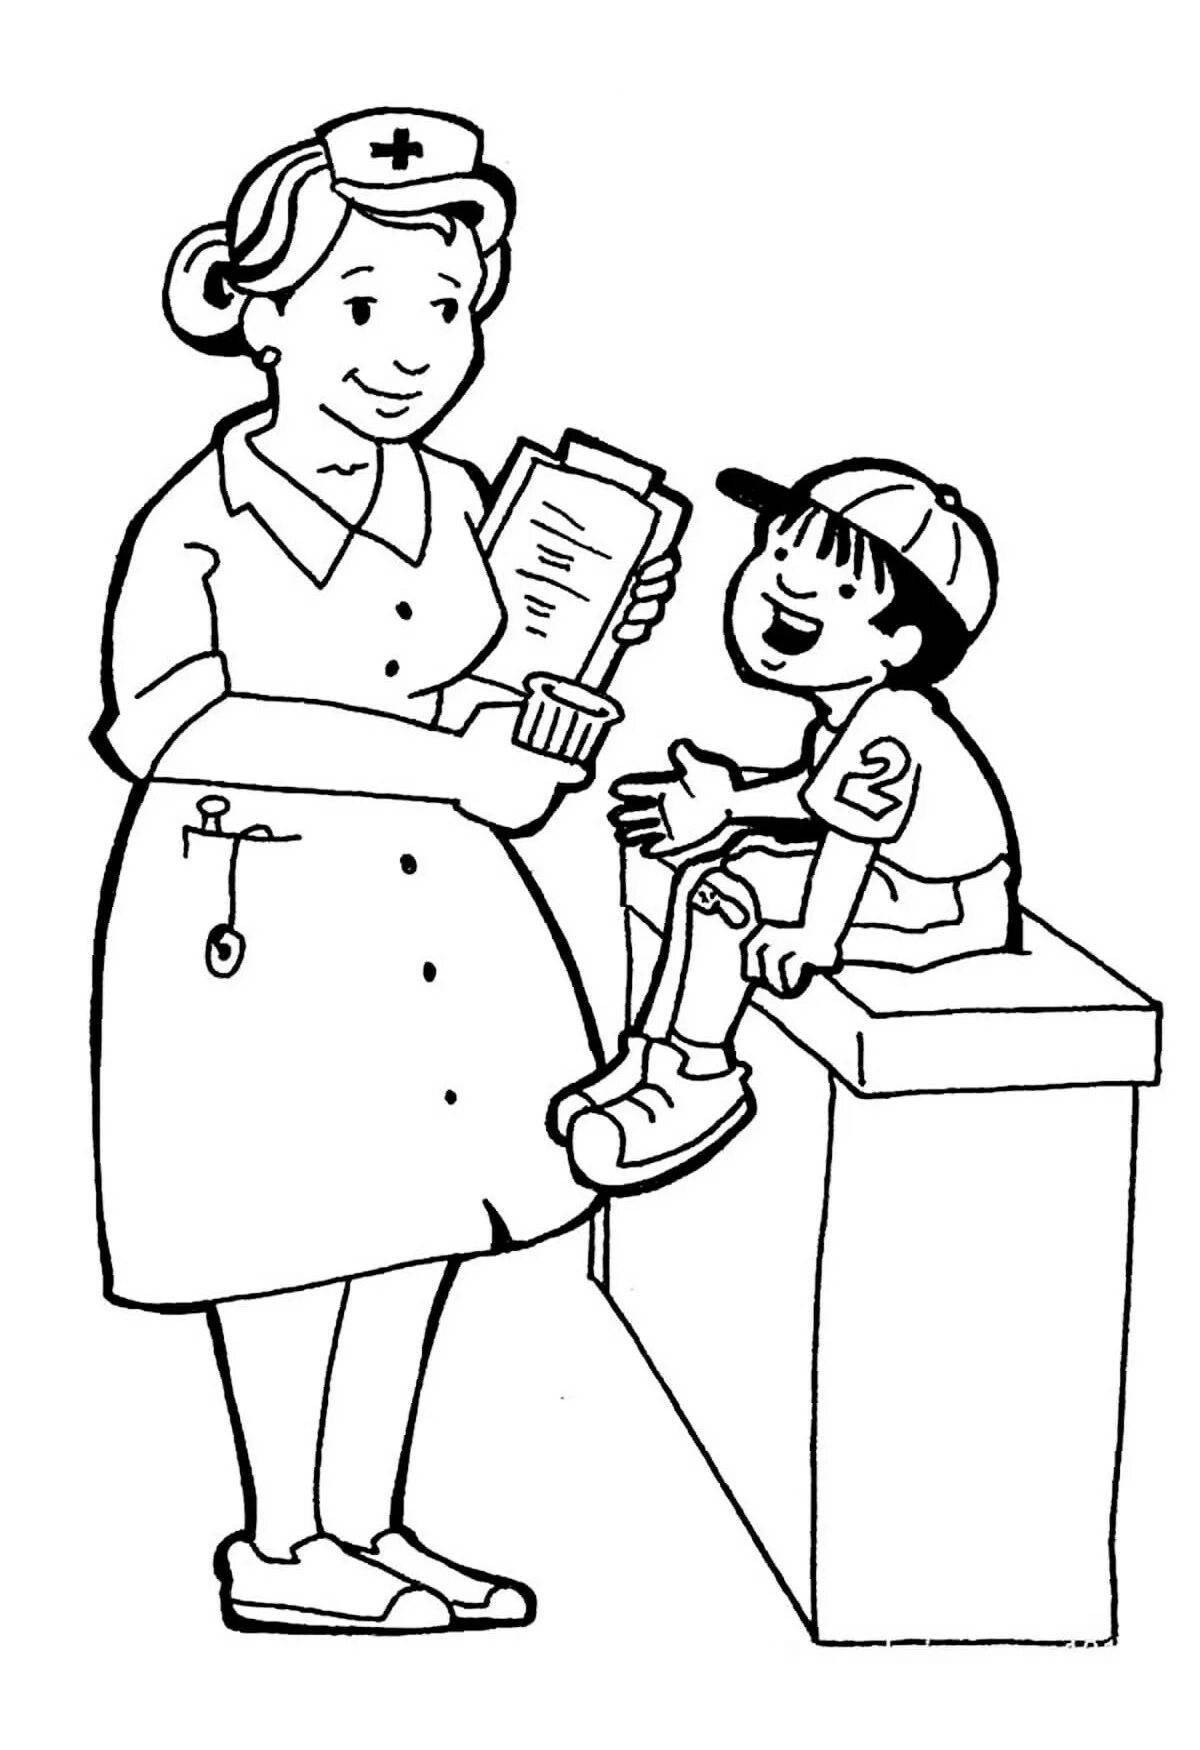 Animated farmer coloring page